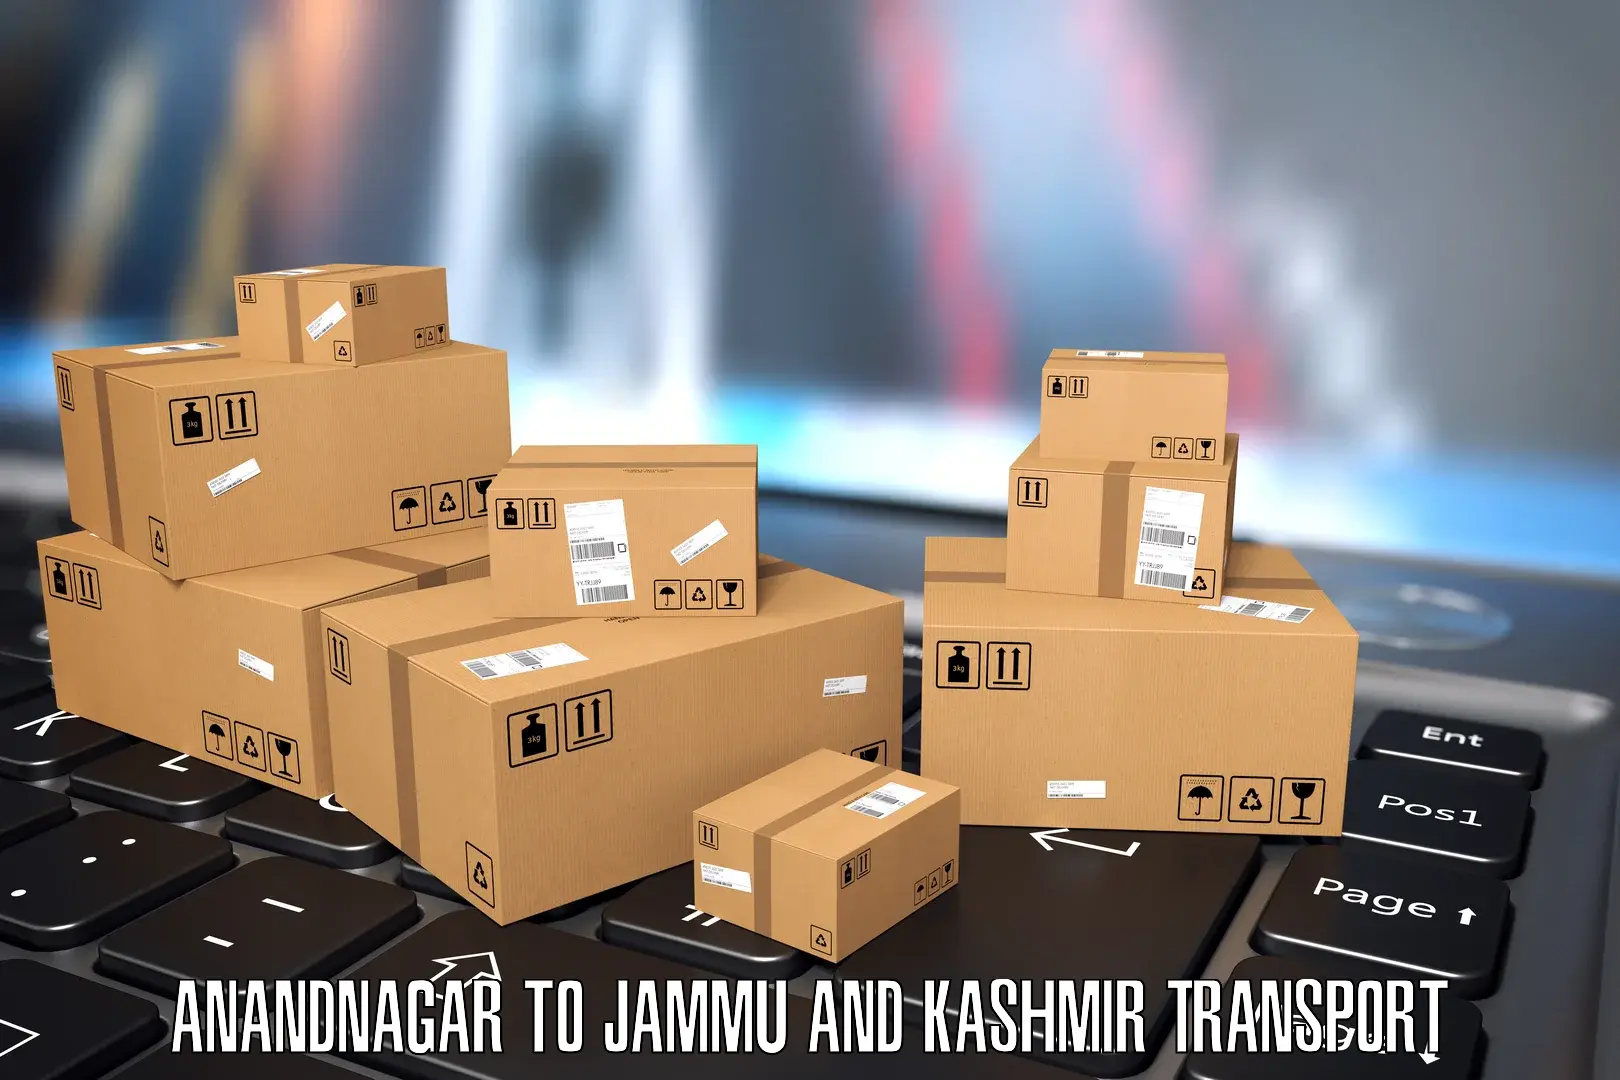 Container transport service Anandnagar to Shopian